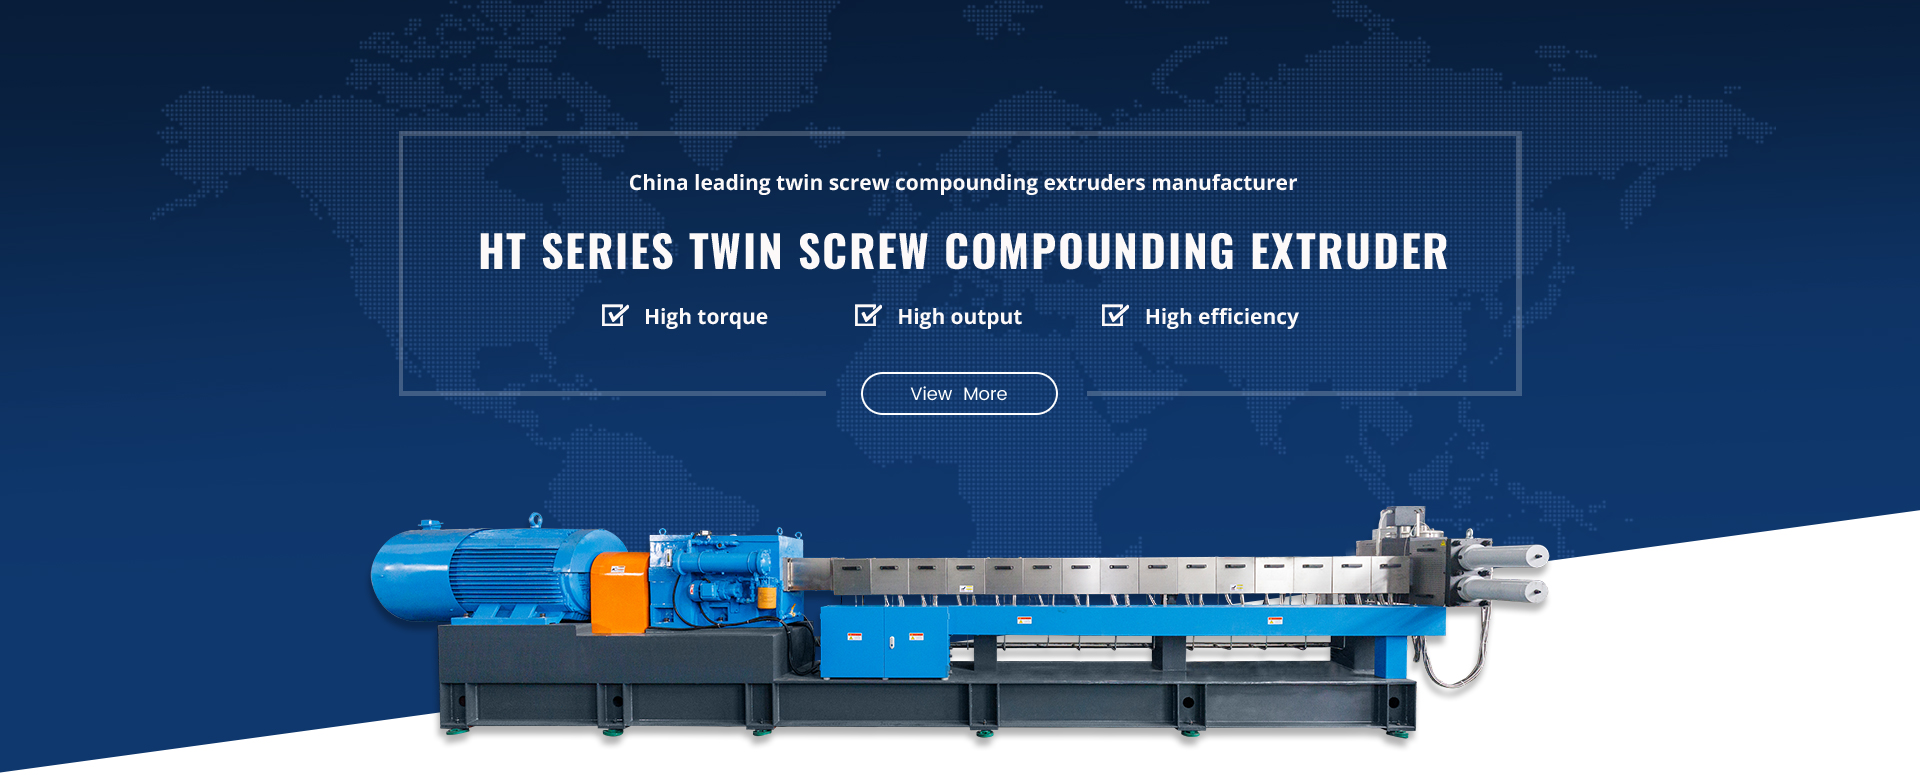 PP/PE+Maleic Anhydride (MAH) Compounding Extruder